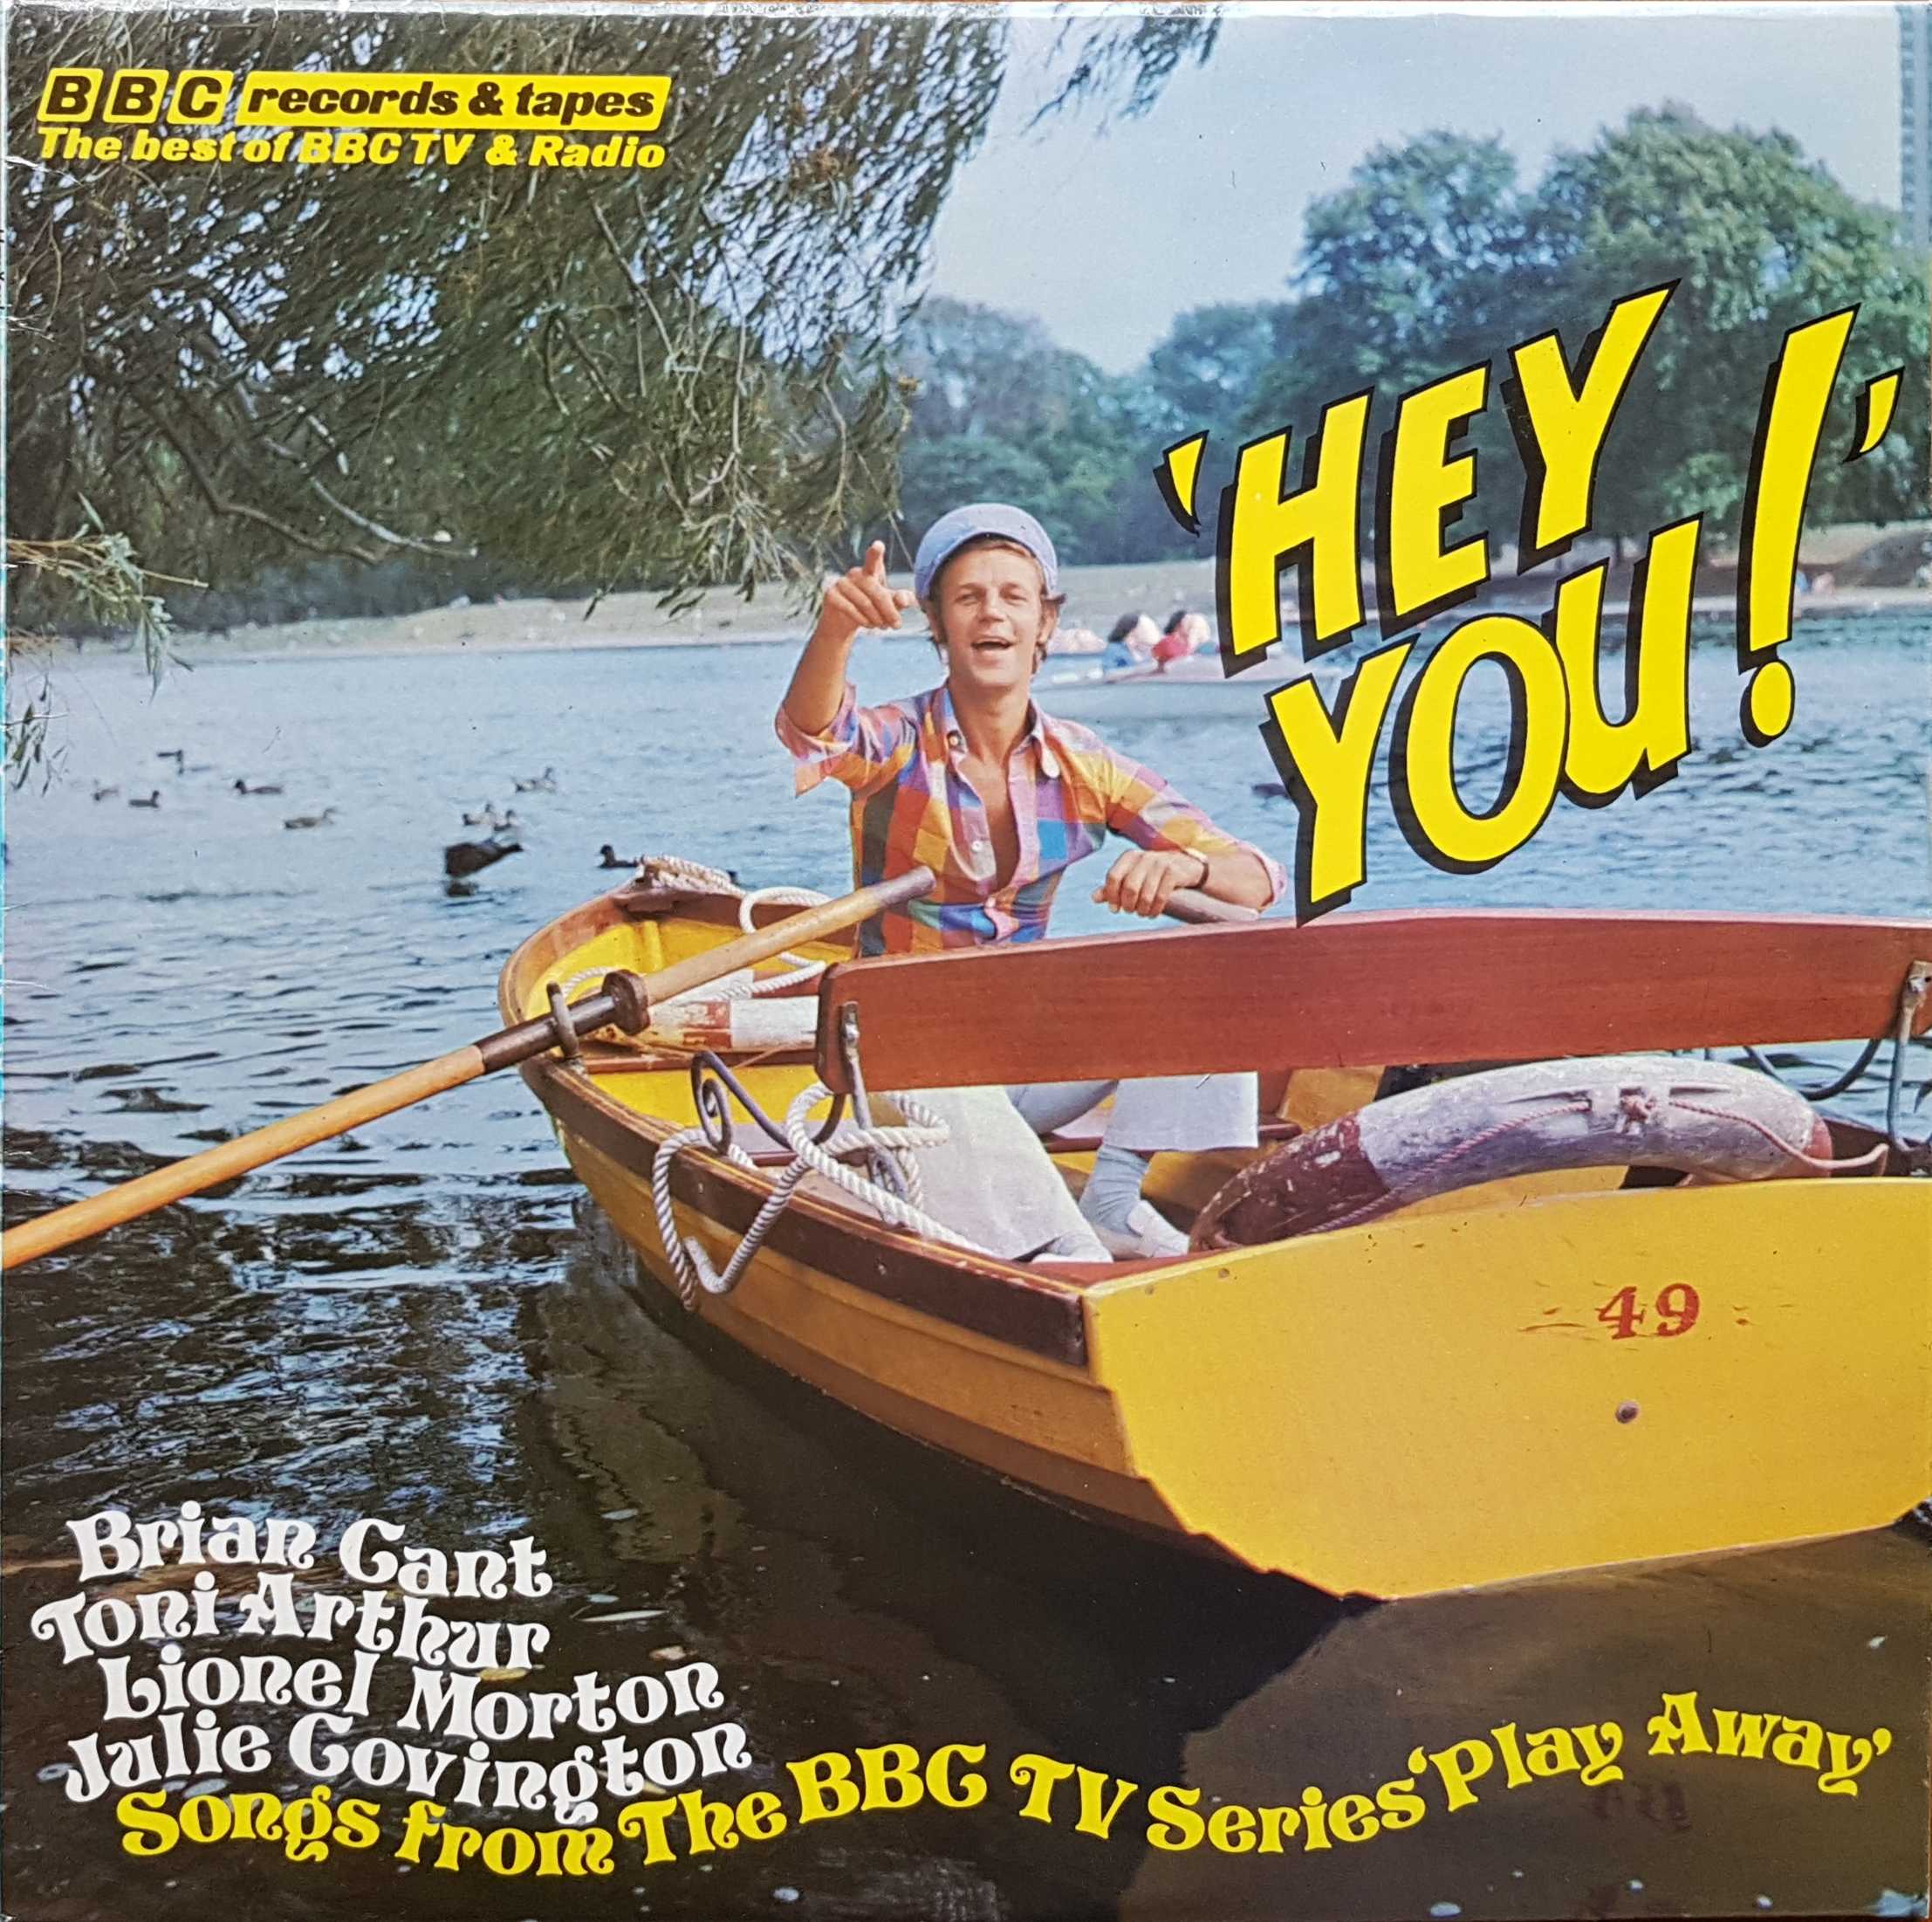 Picture of REC 209 Hey you ! by artist Brian Cant / Toni Arthur / Lionel Morton / Julie Govington from the BBC albums - Records and Tapes library